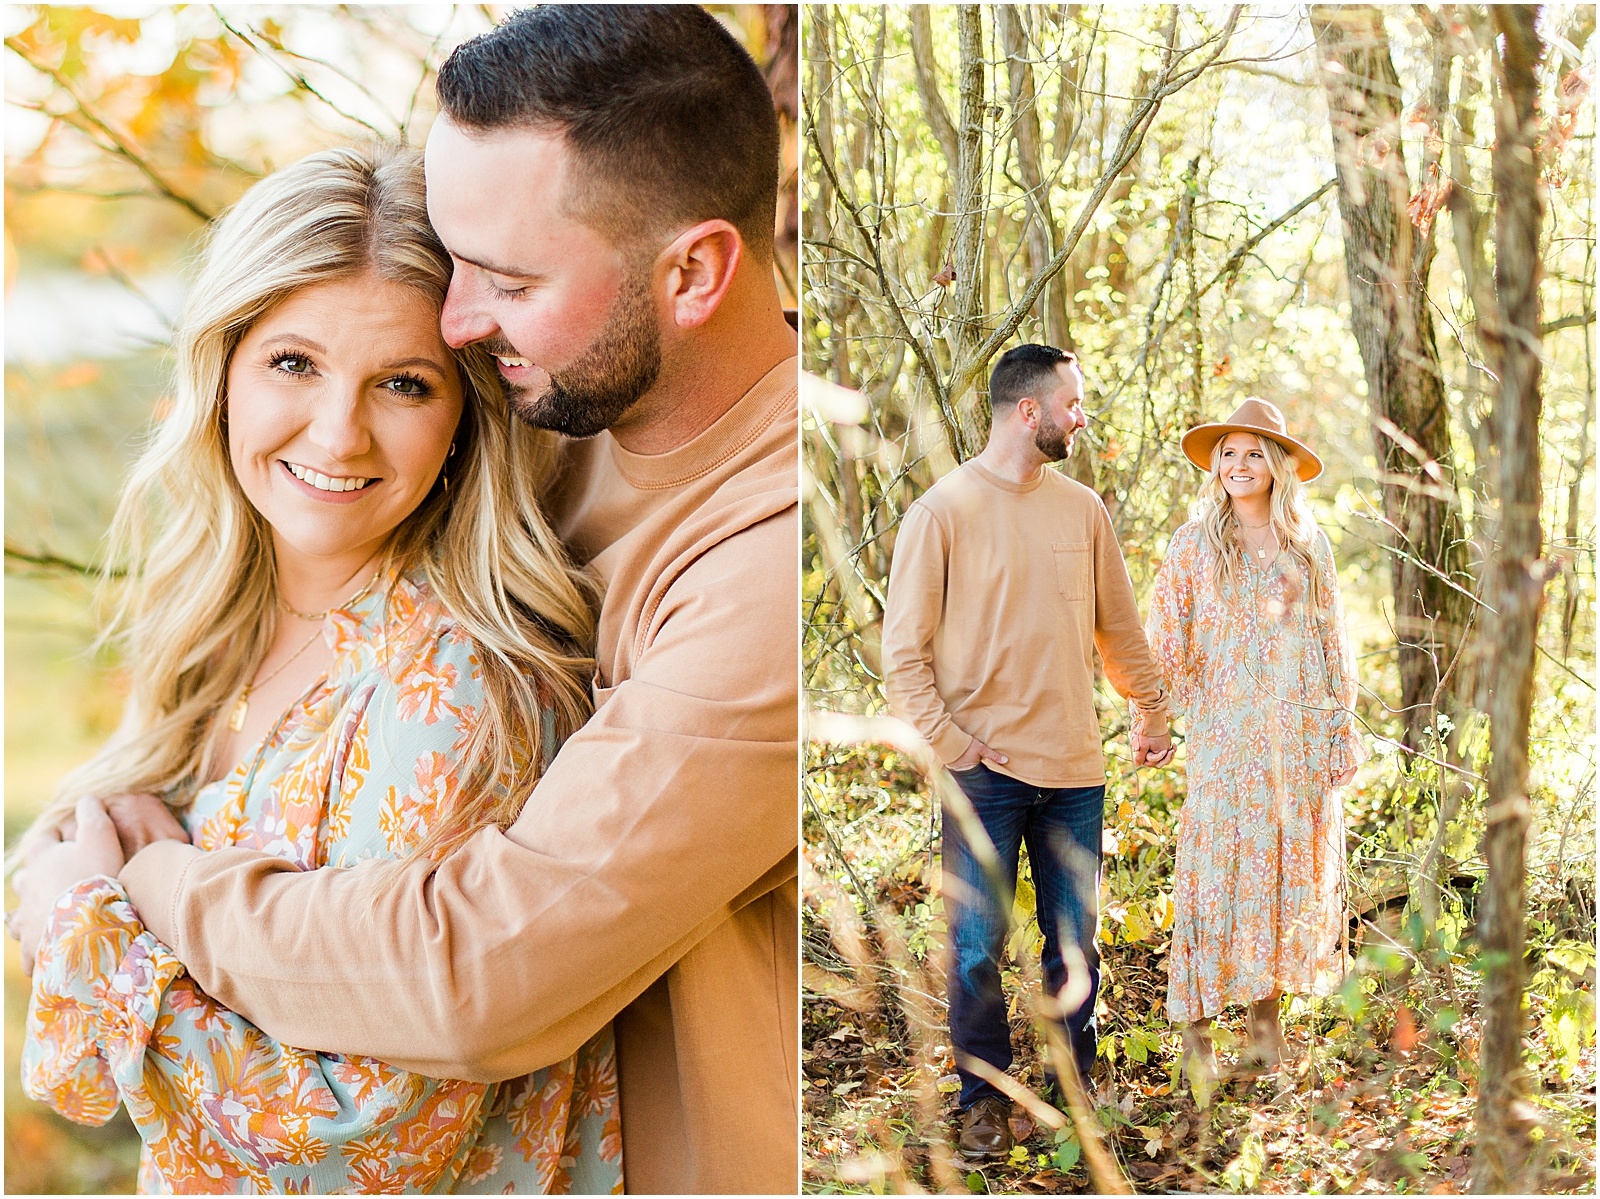 A Southern Indiana Engagement Session | Charleston and Erin | Bret and Brandie Photography013.jpg